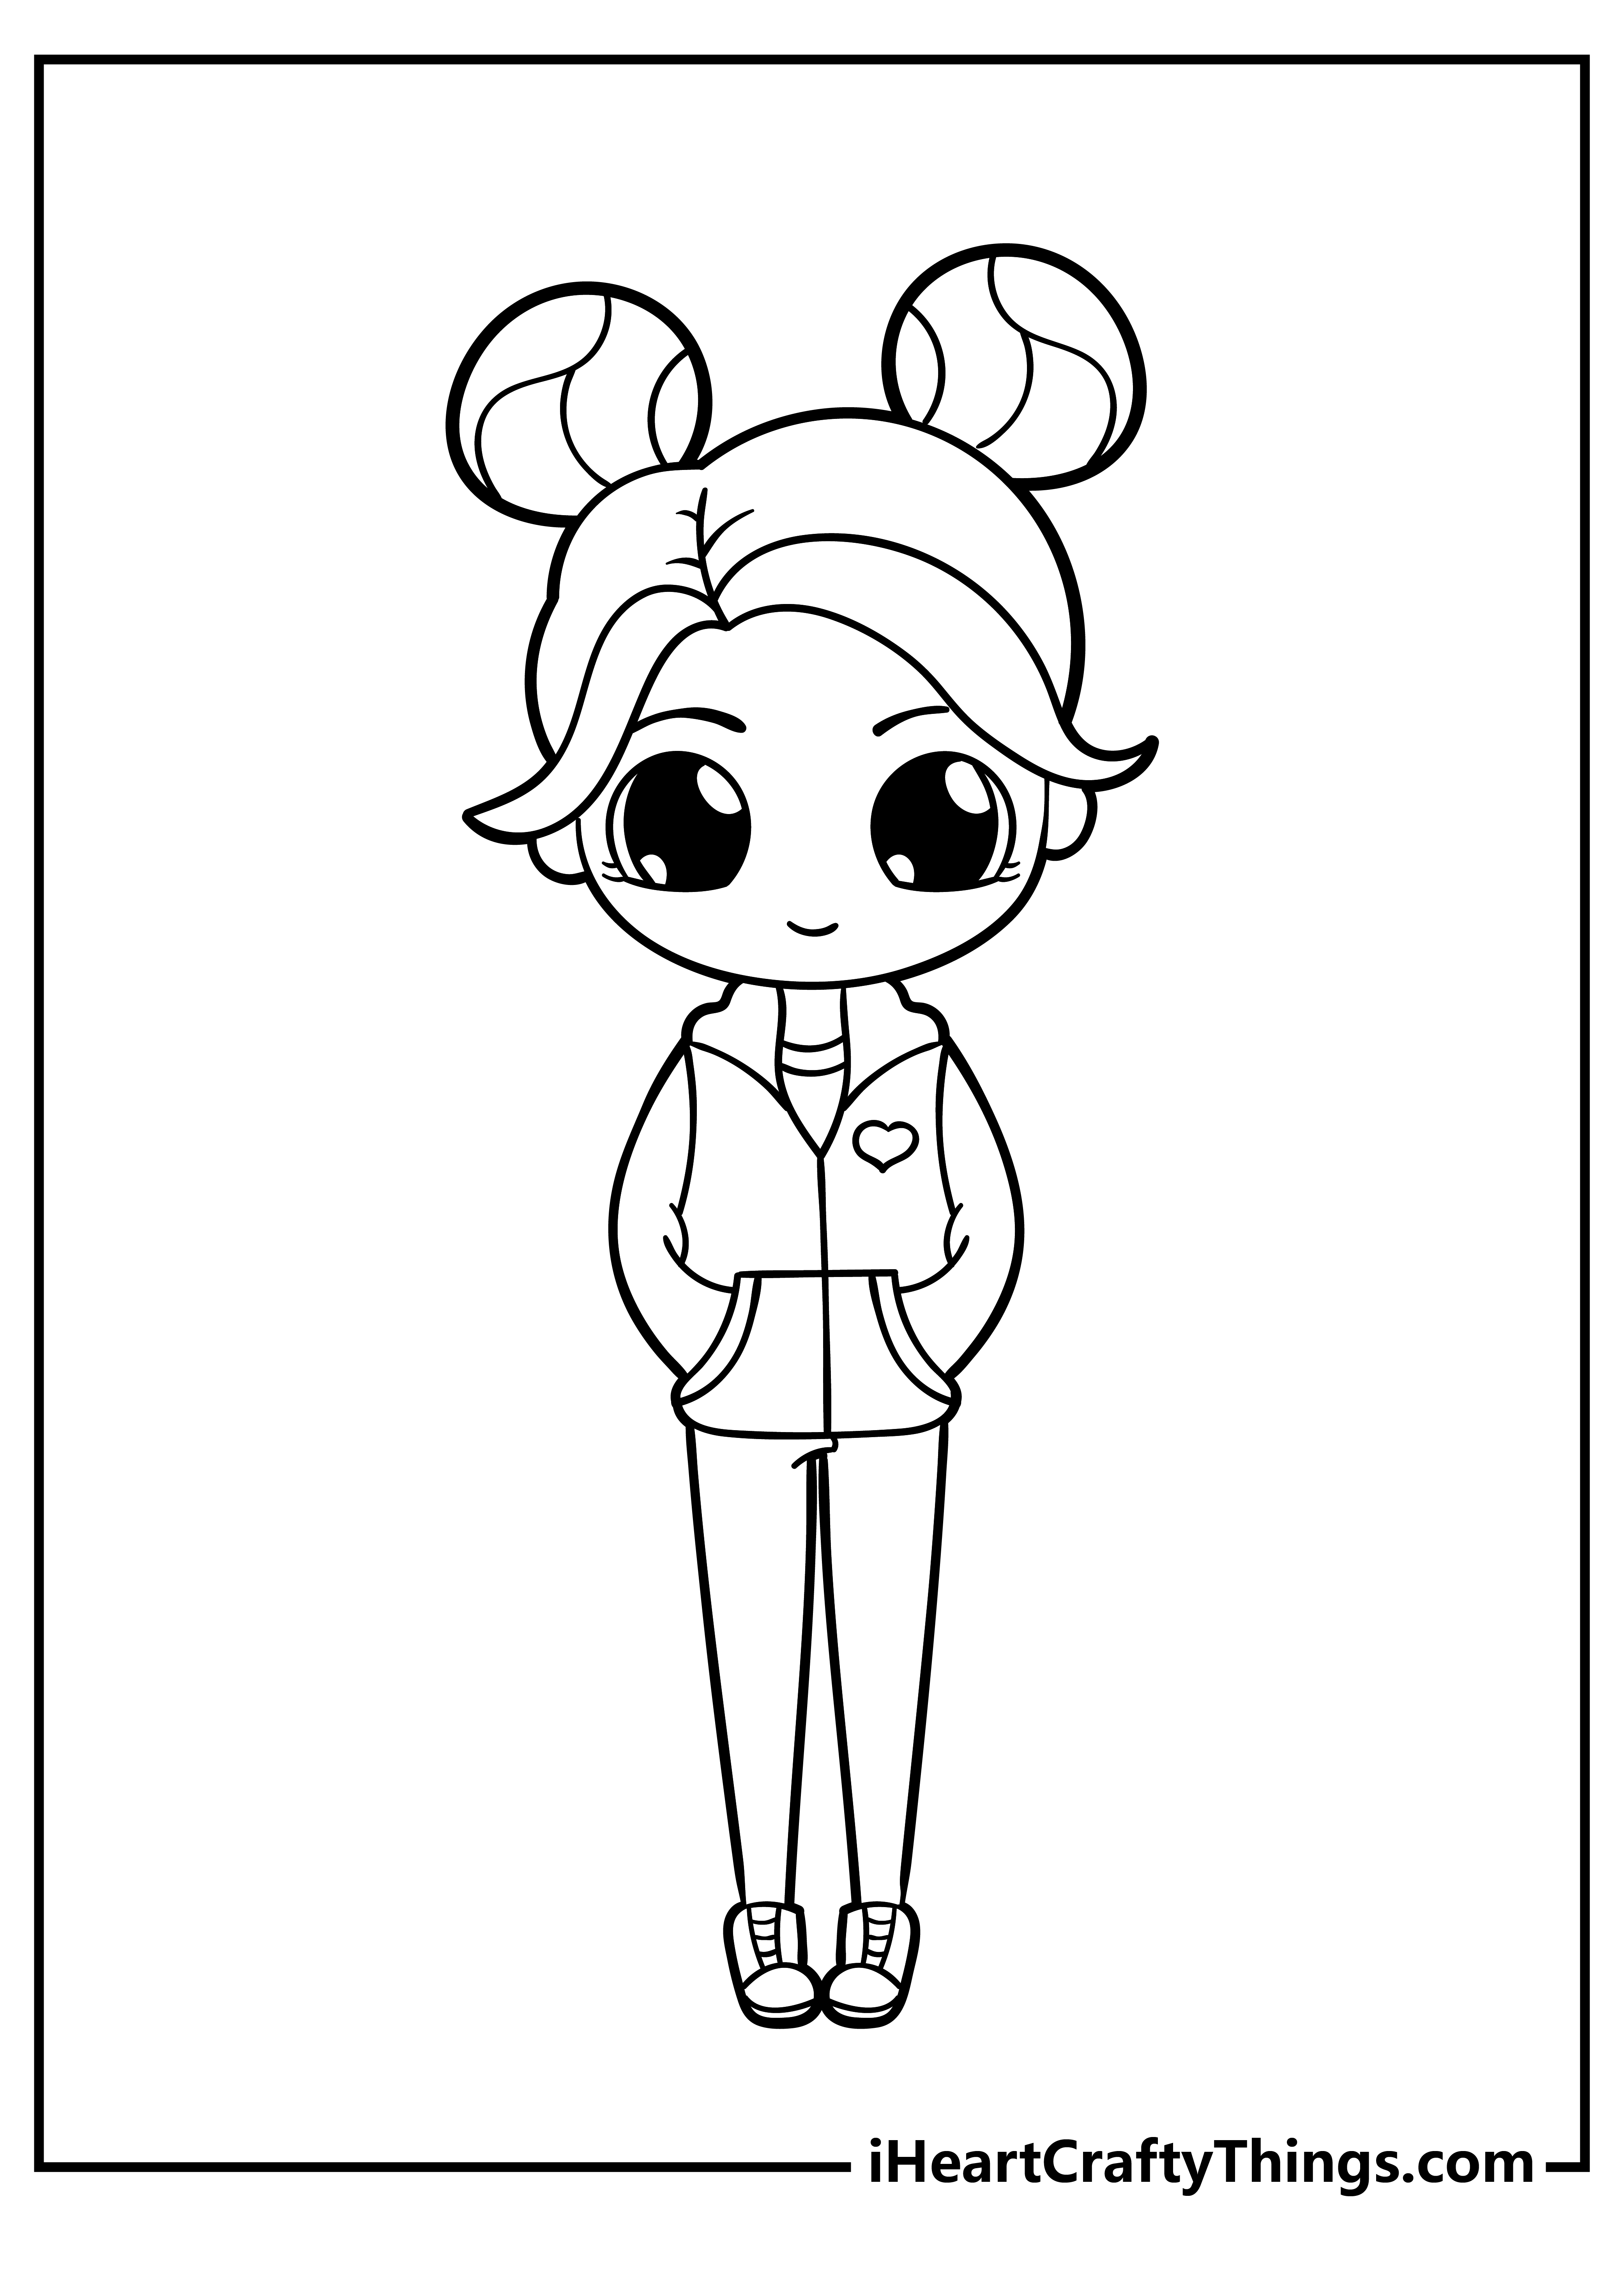 Printable Cute Coloring Pages For Girls Updated 18